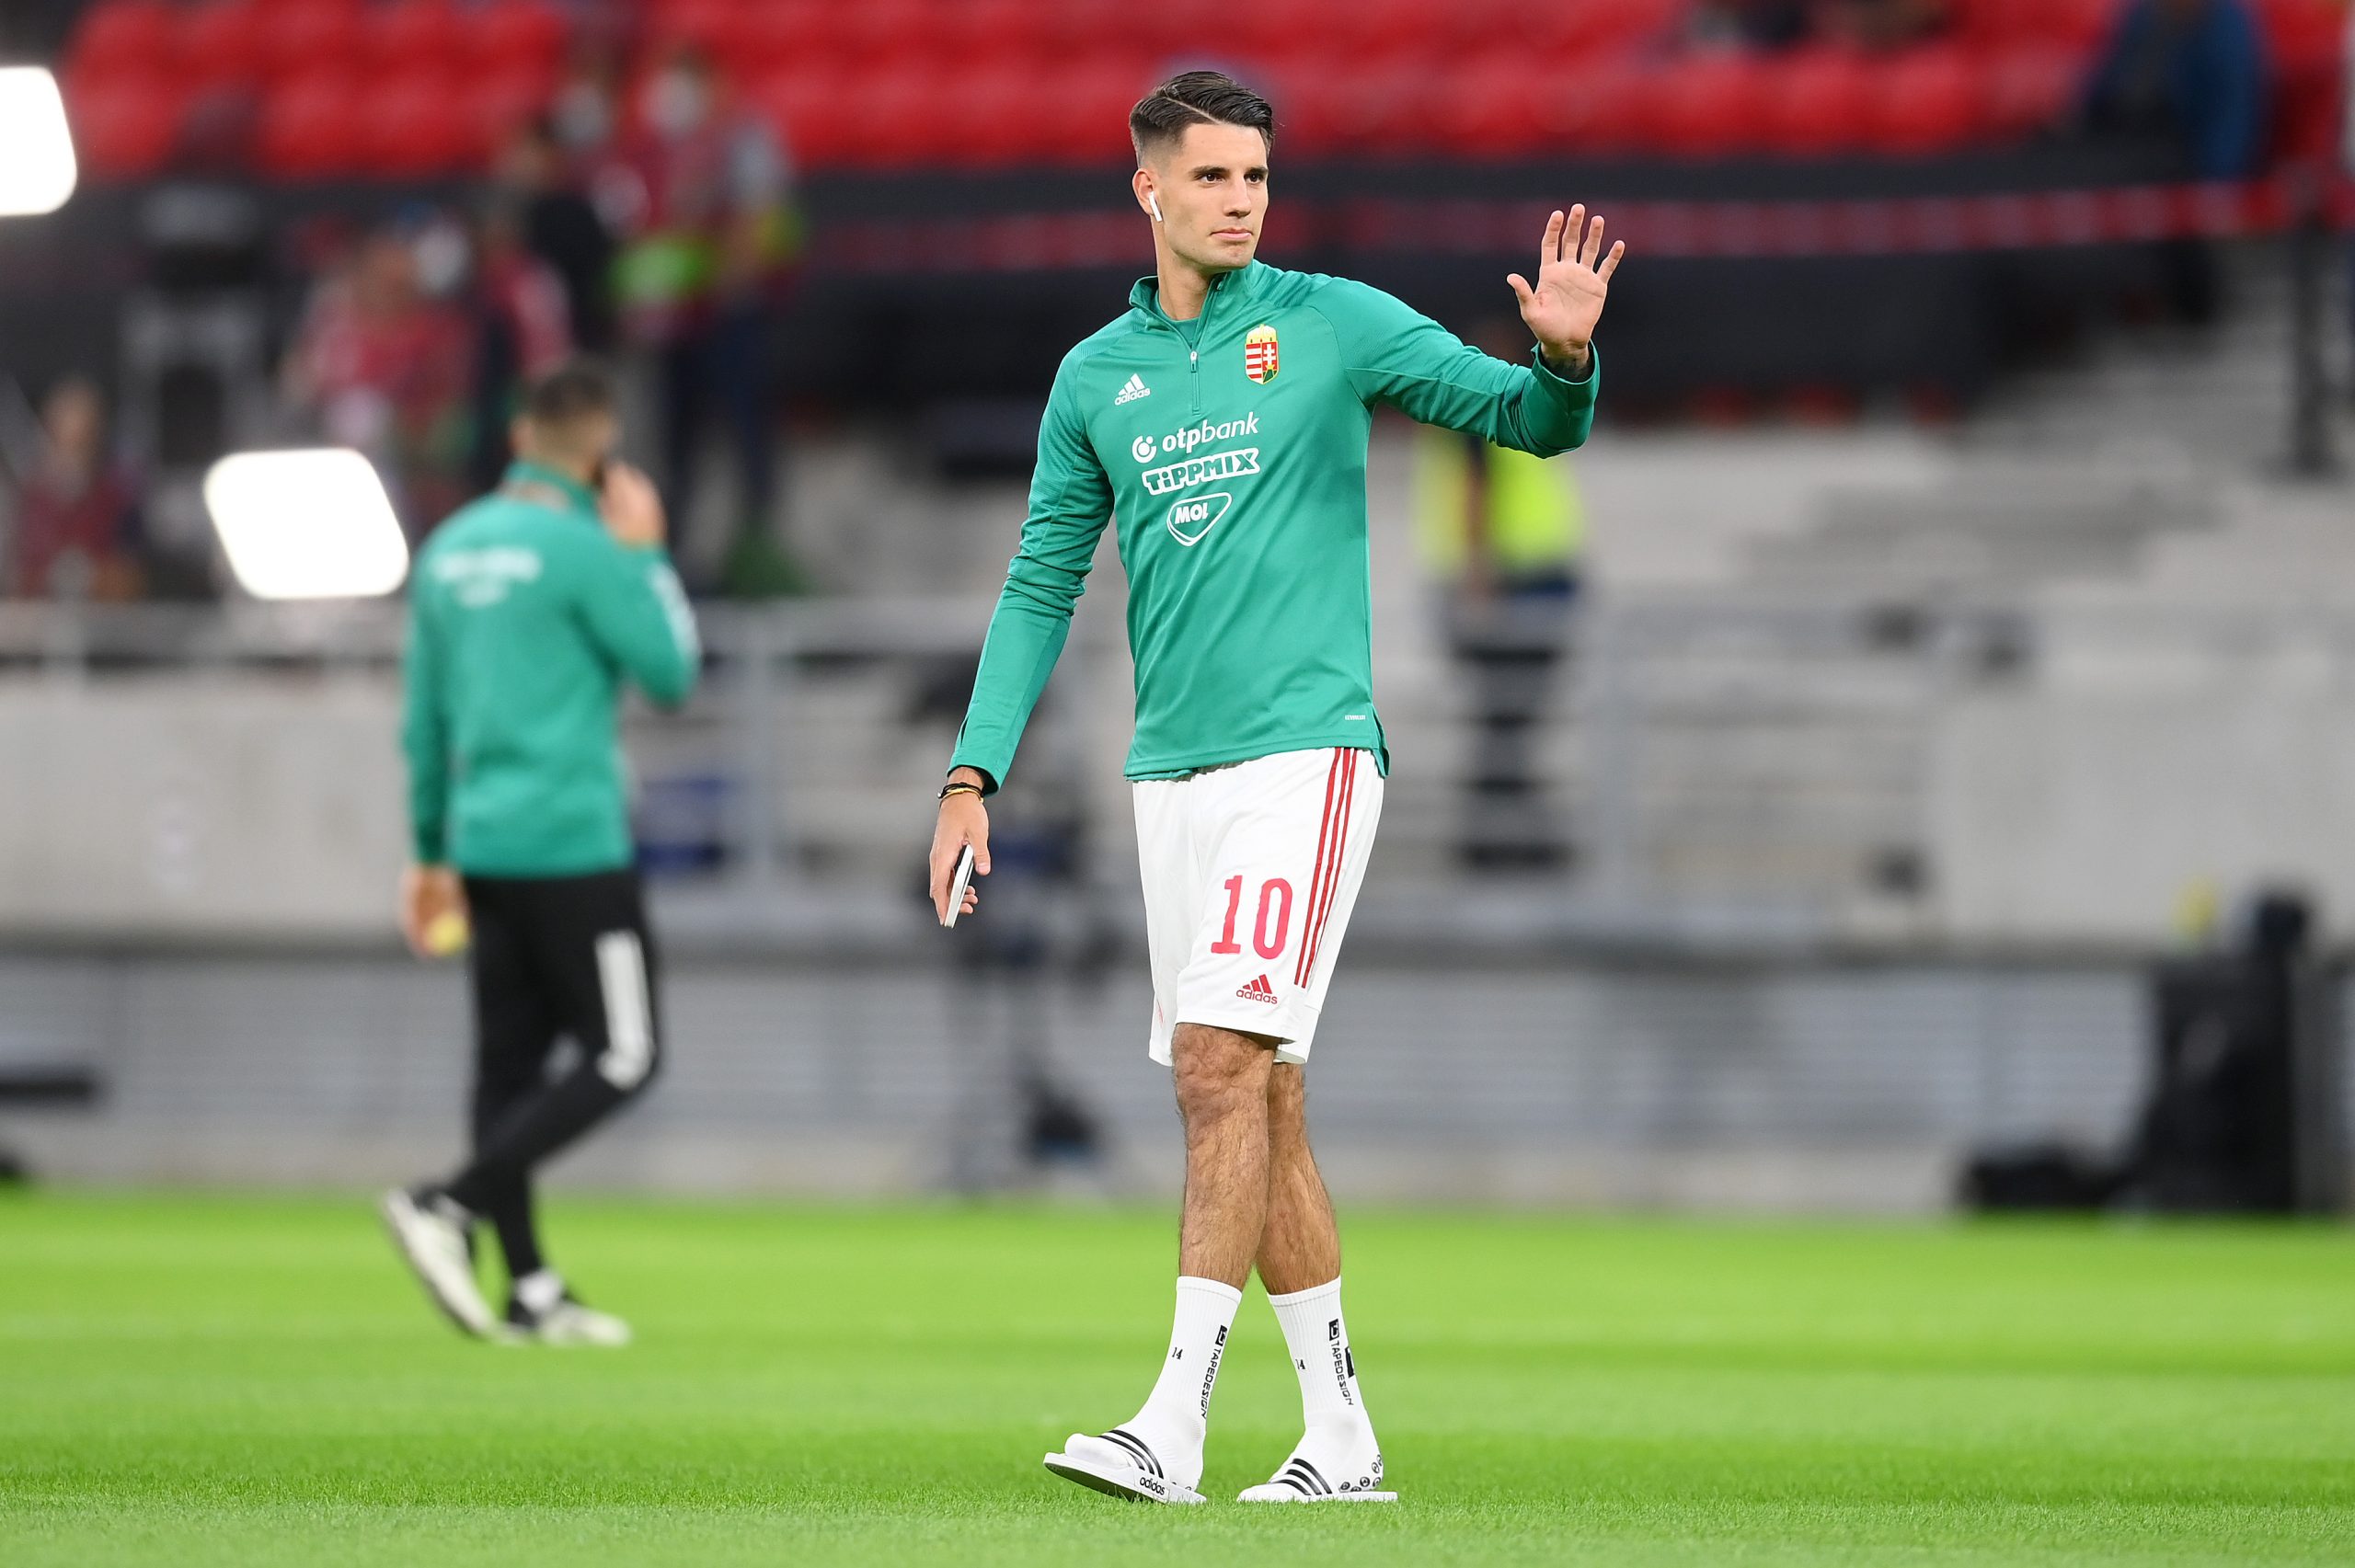 Dominik Szoboszlai is a star for Hungary. (Photo by Michael Regan/Getty Images)